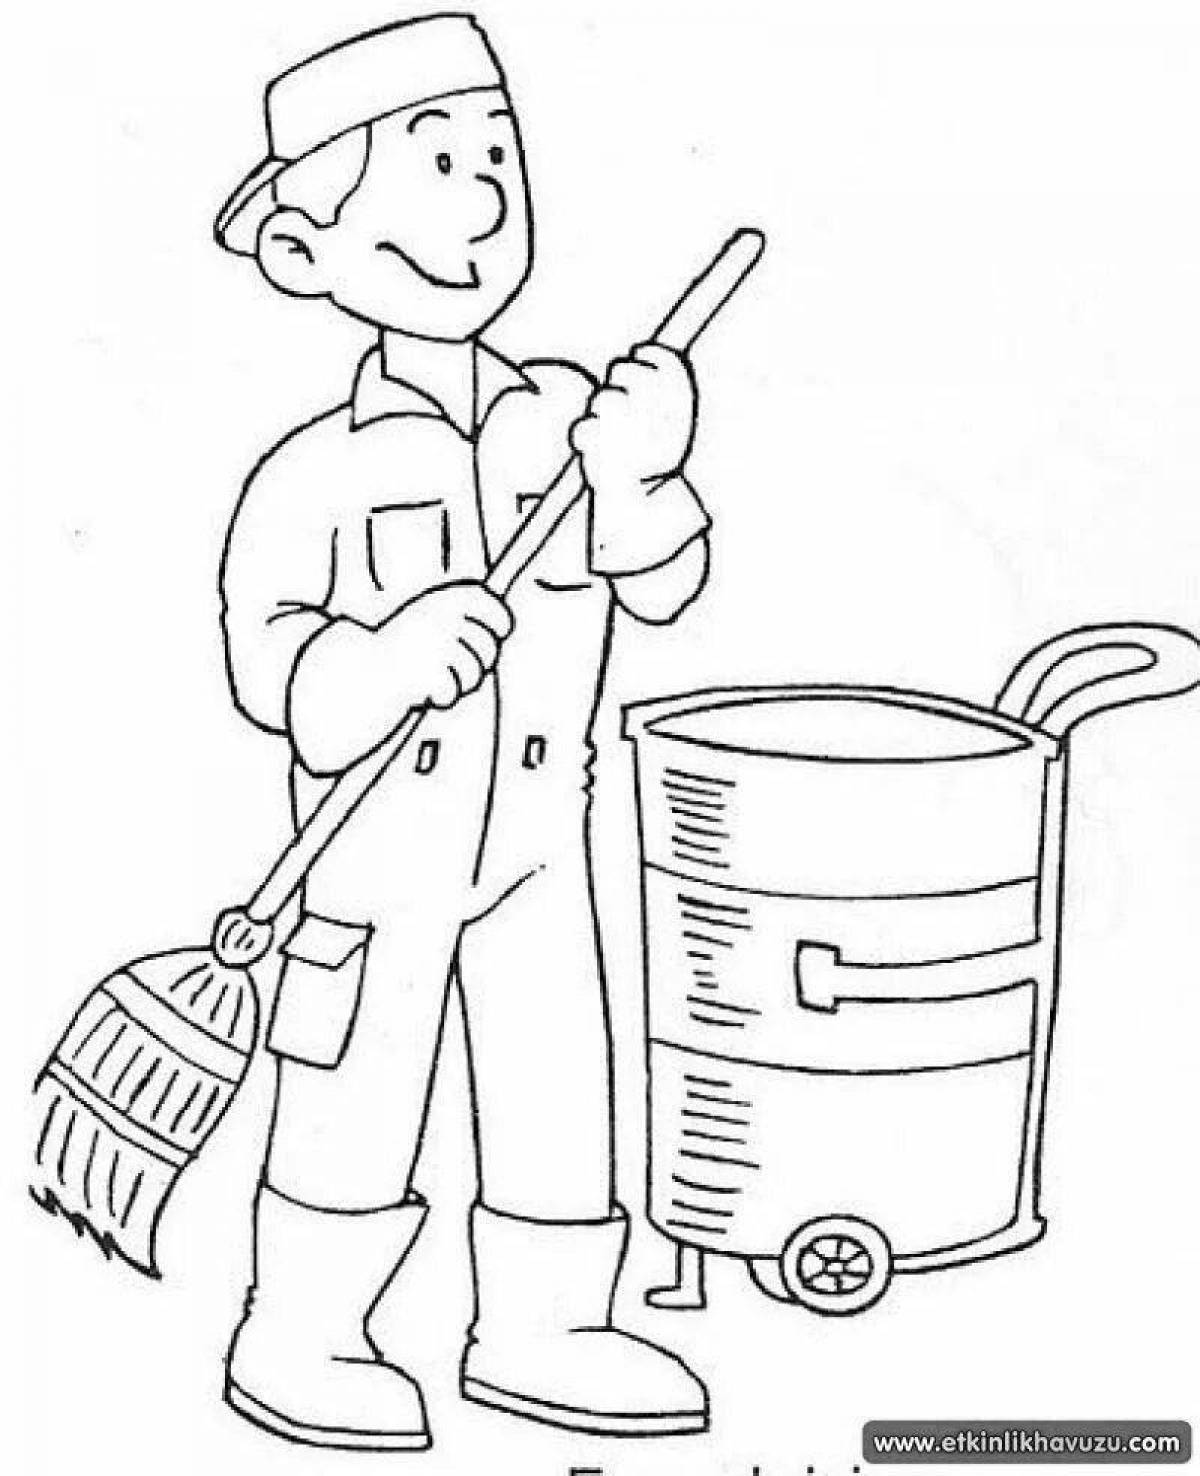 Animated artist coloring page